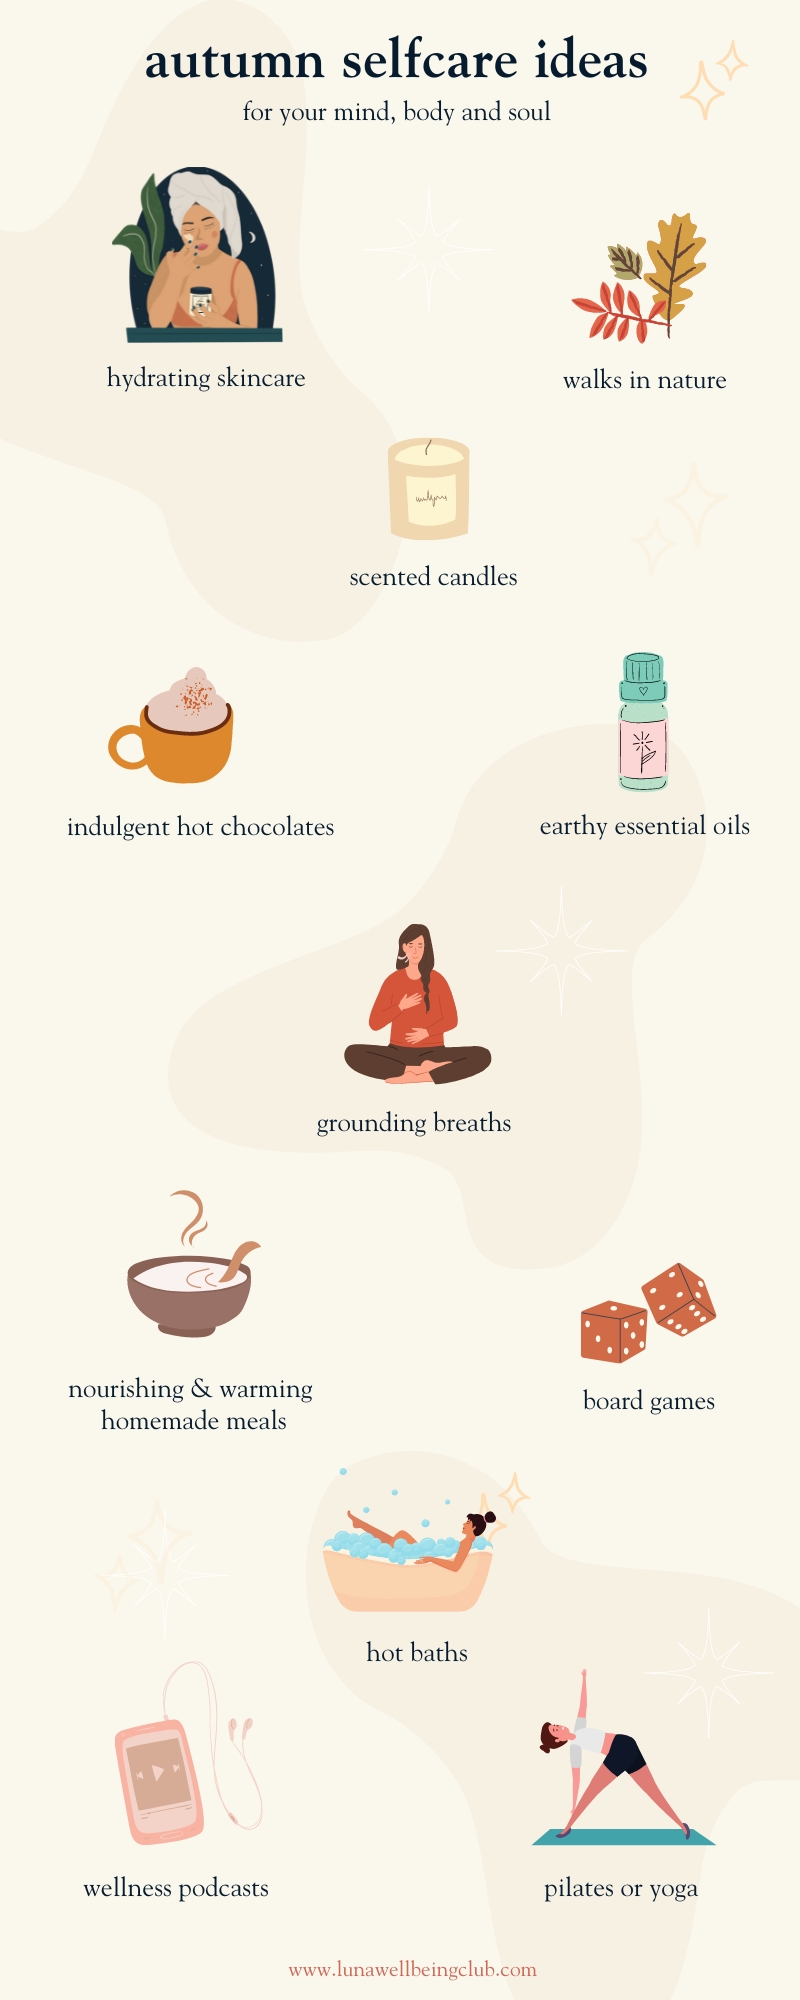 Autumn Self-Care Ideas to Add to Your Routine